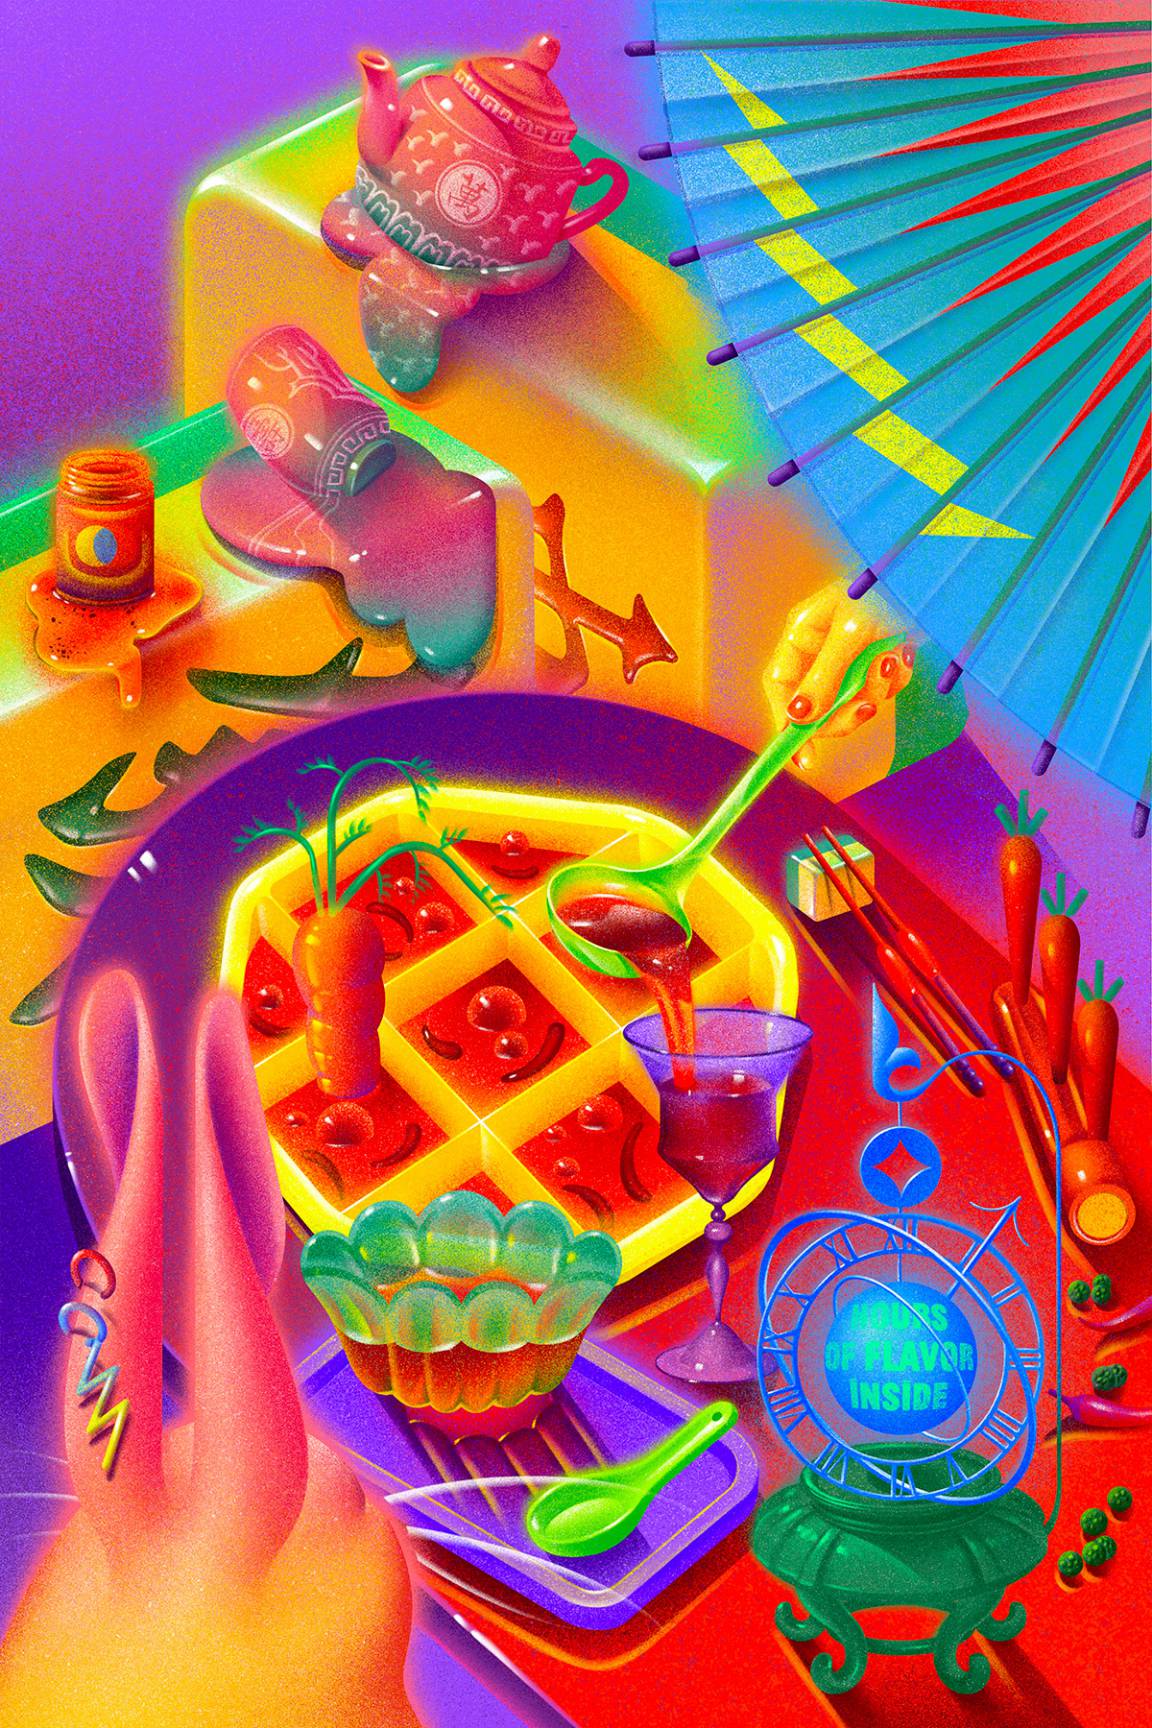 Intricate And Vibrant Surreal Illustrations By Wenjing Yang (7)